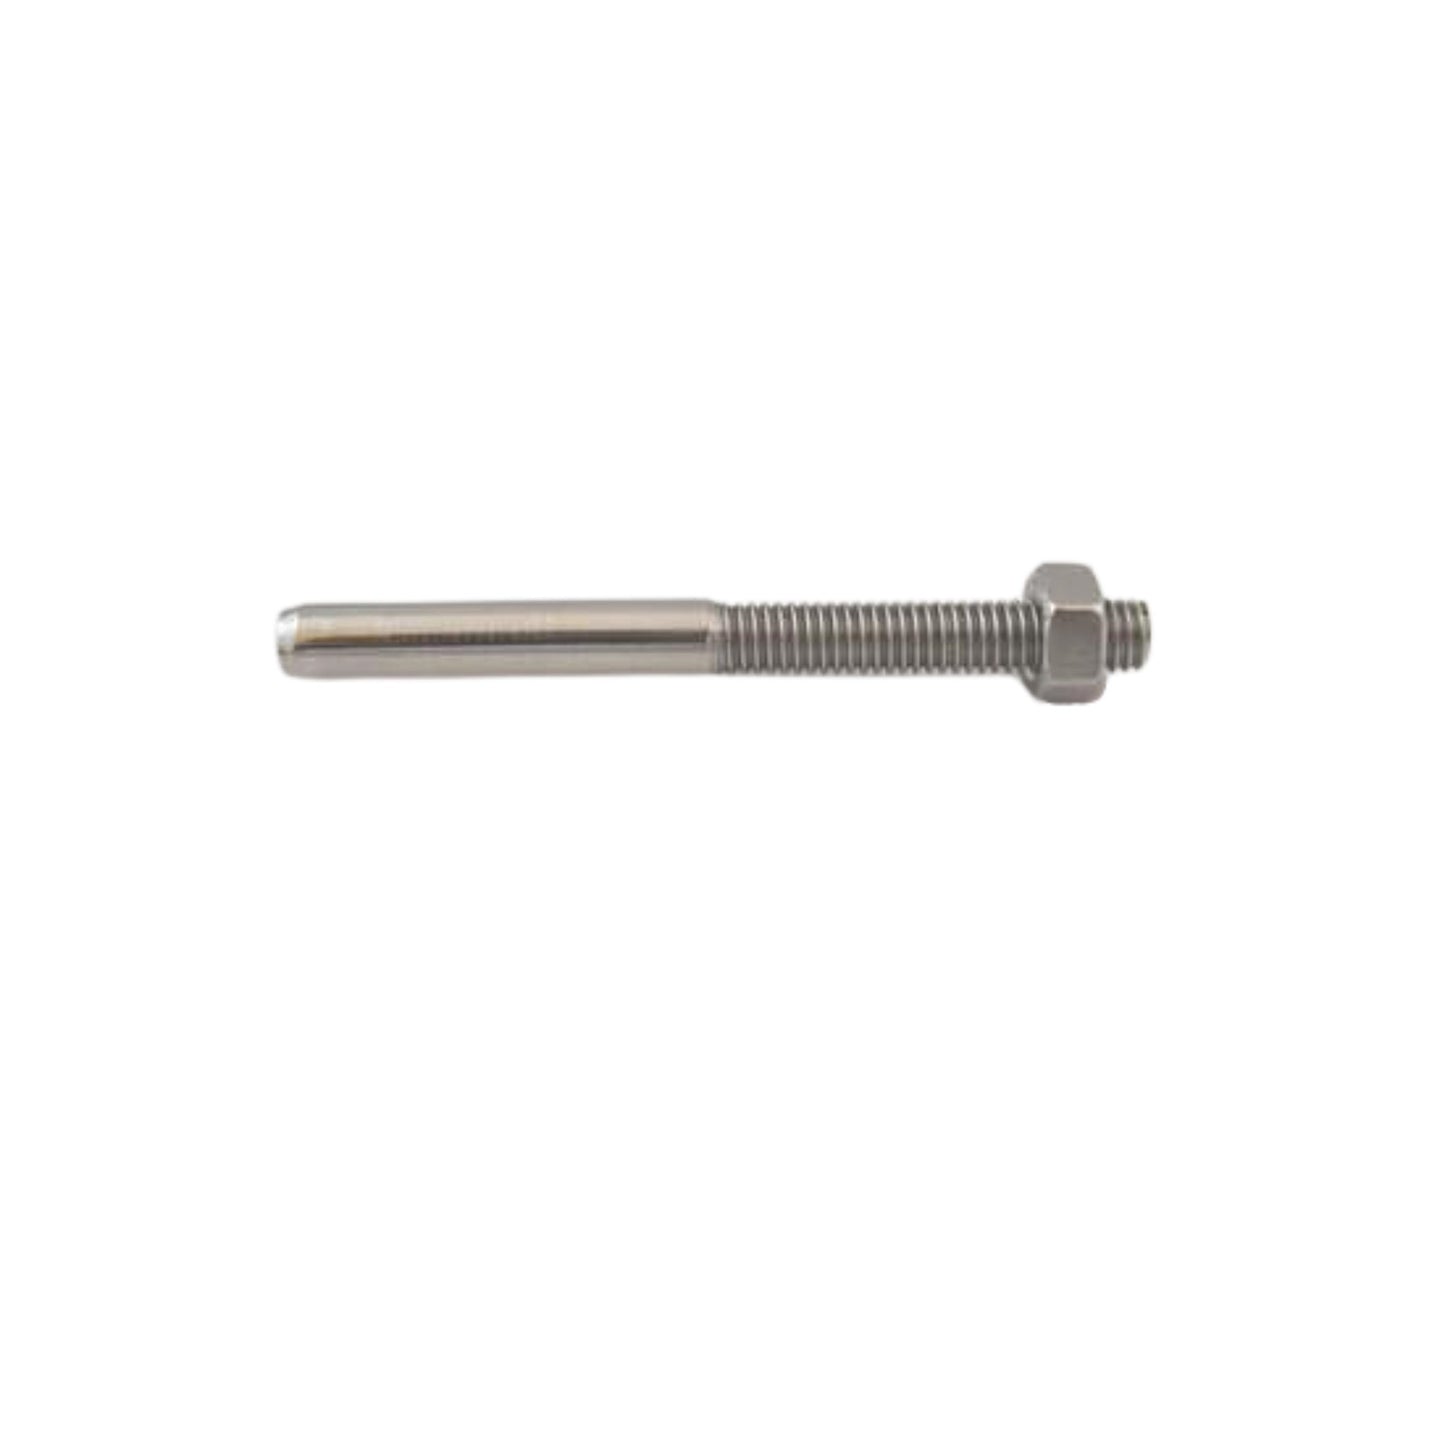 Slimline Swage Stud for 4mm Cable